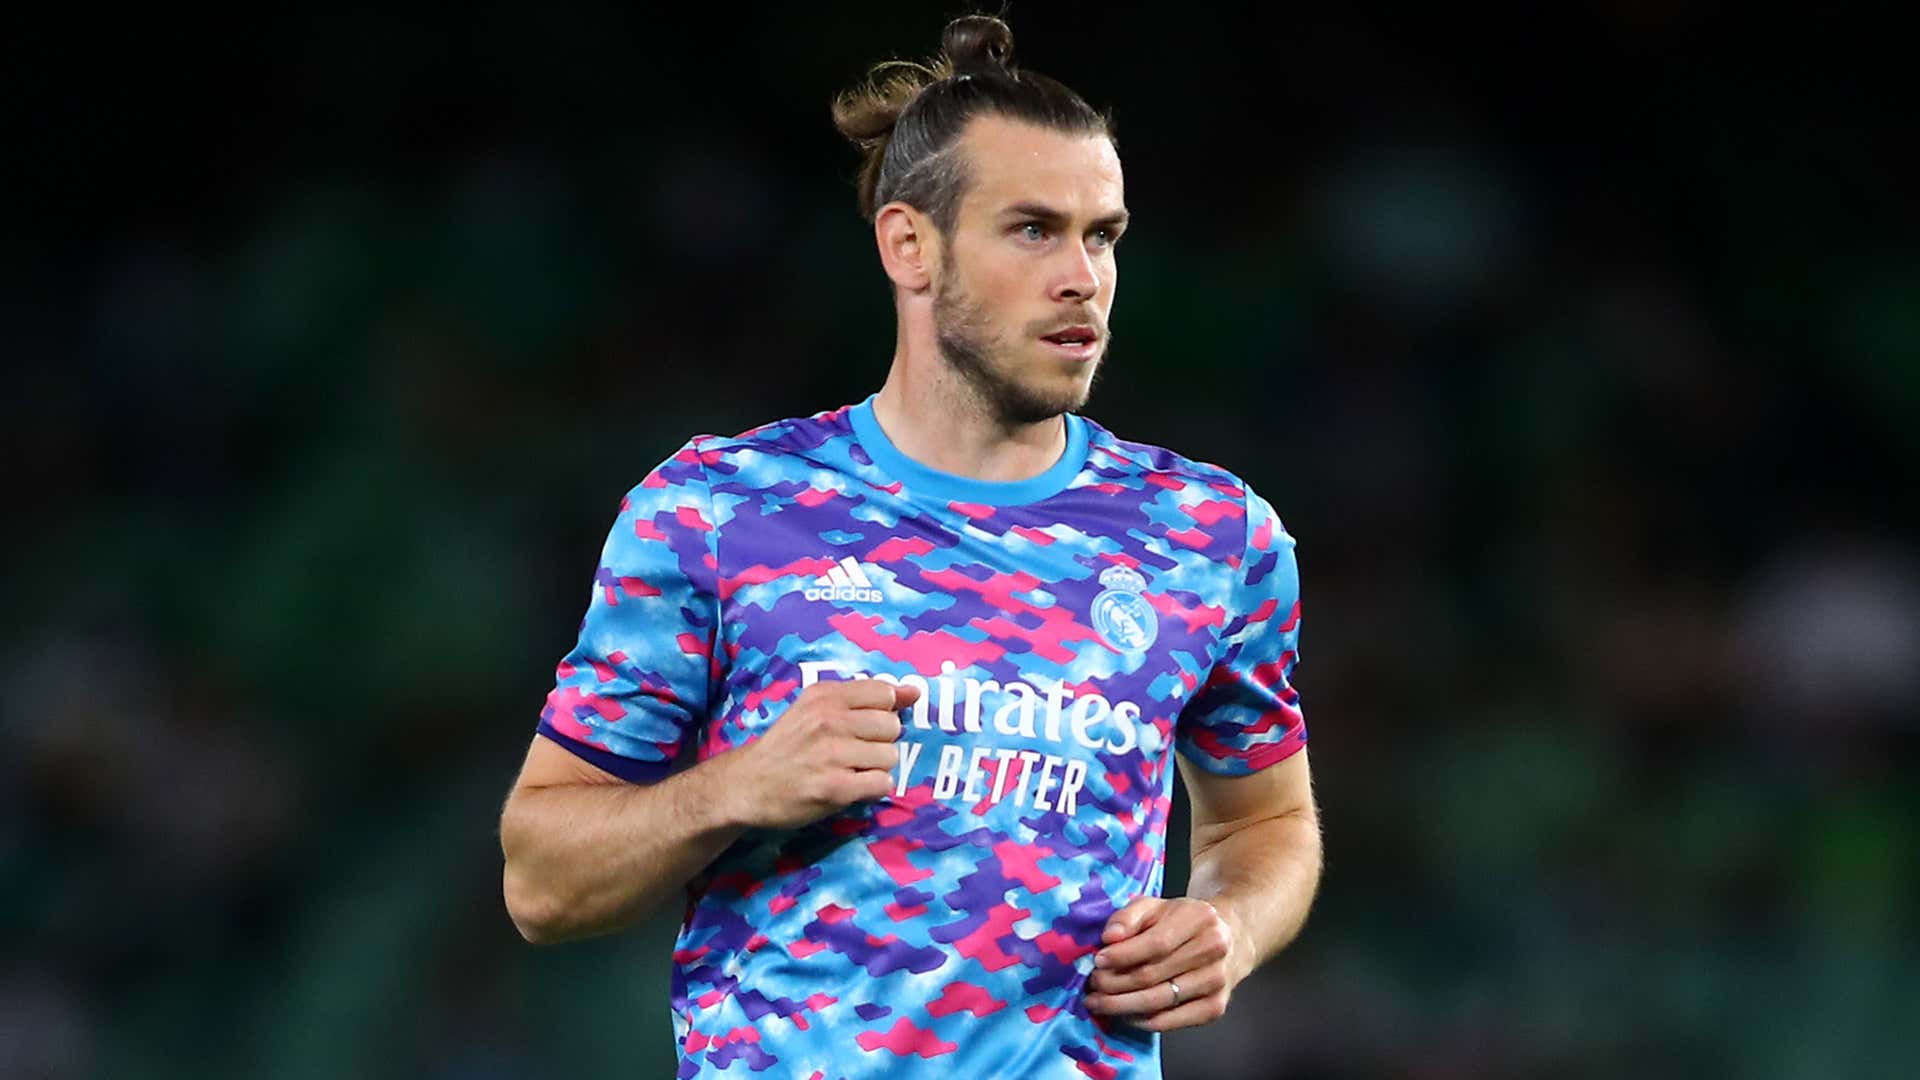 Bale claims to be the 'No 1 golfer' at Real Madrid as he continues recovery from hamstring injury